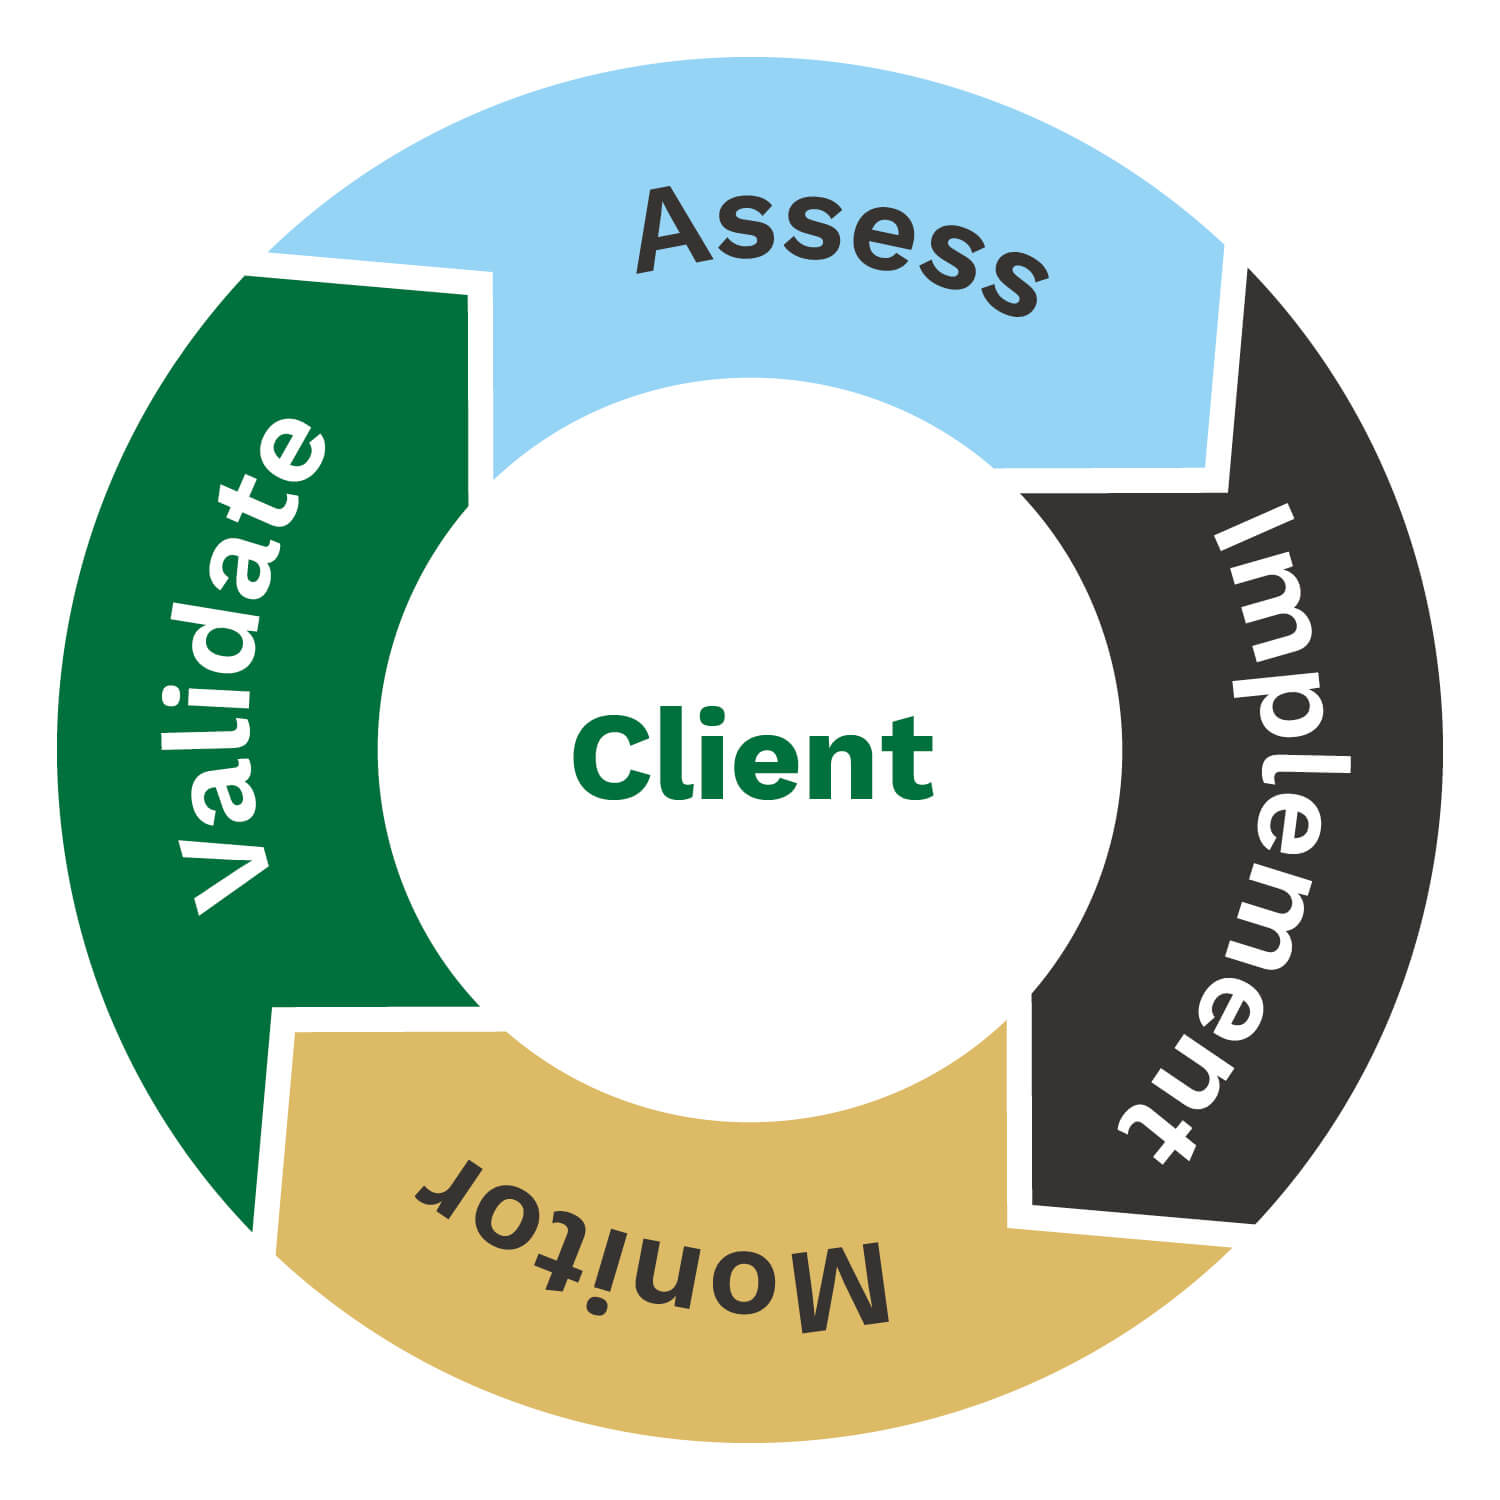 Client: Assess - Implement - Monitor - Validate